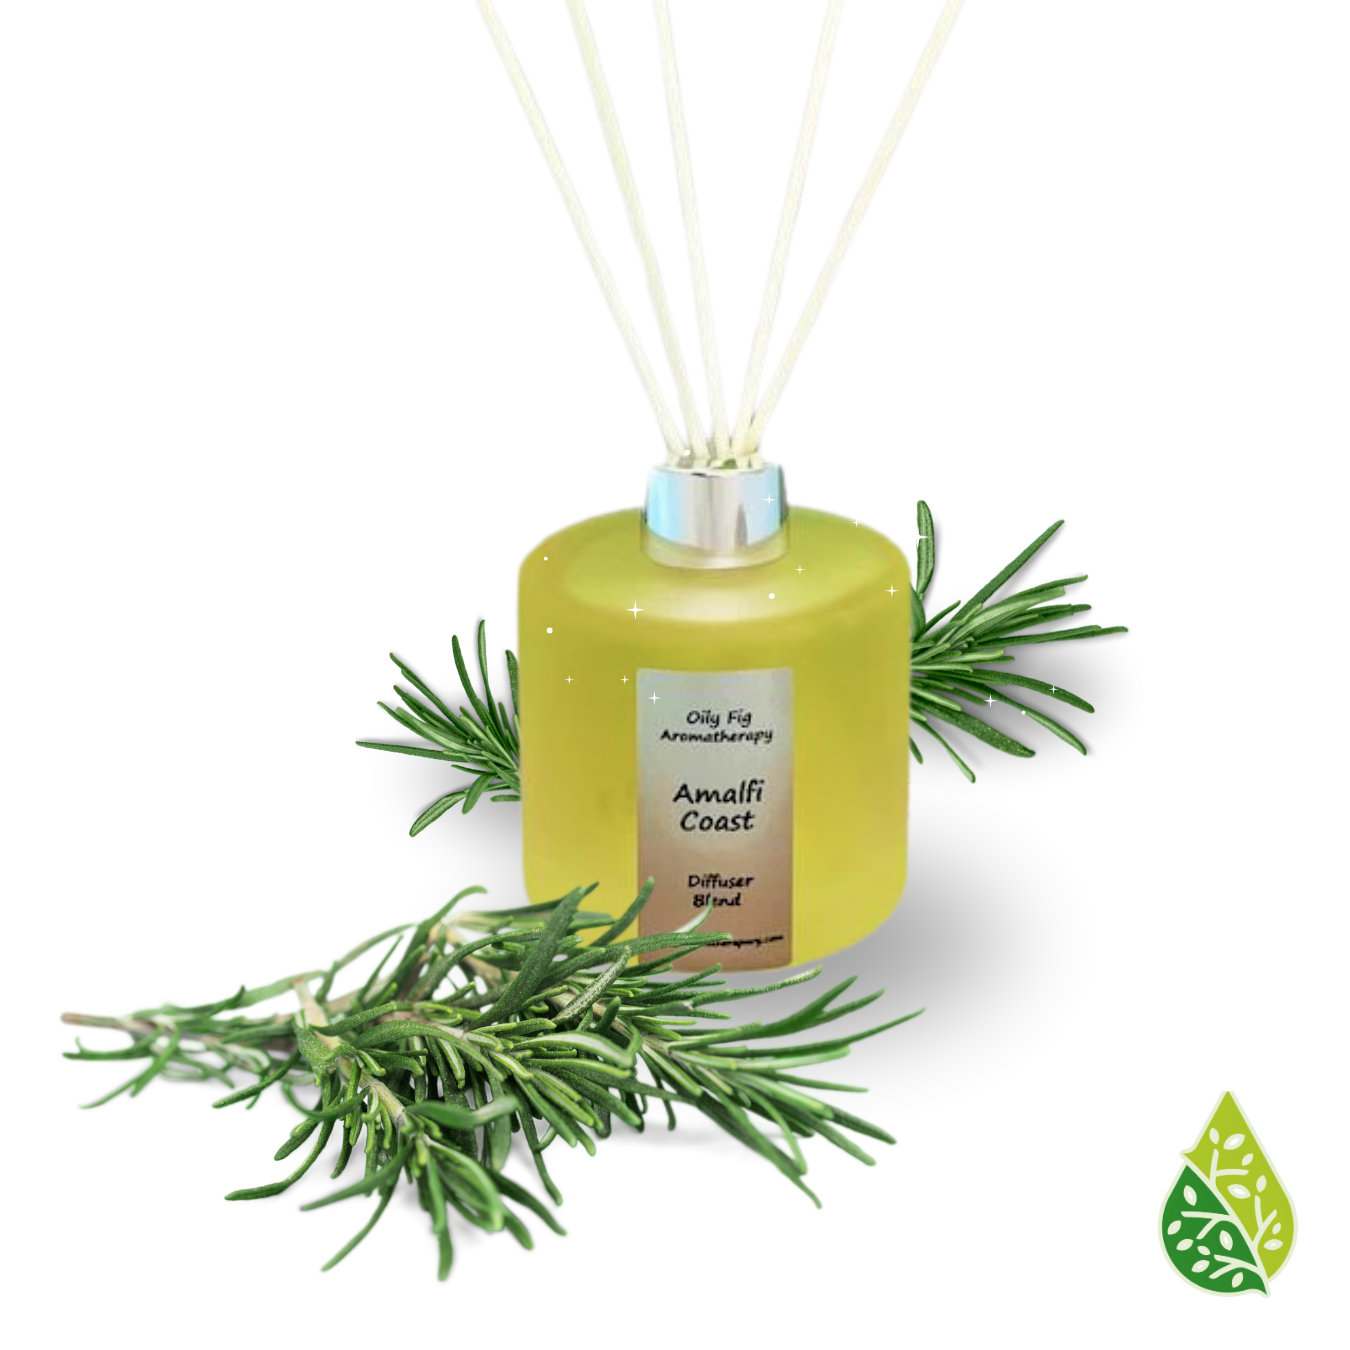 Amalfi coast is a fragrant Aromatherapy diffuser for your home